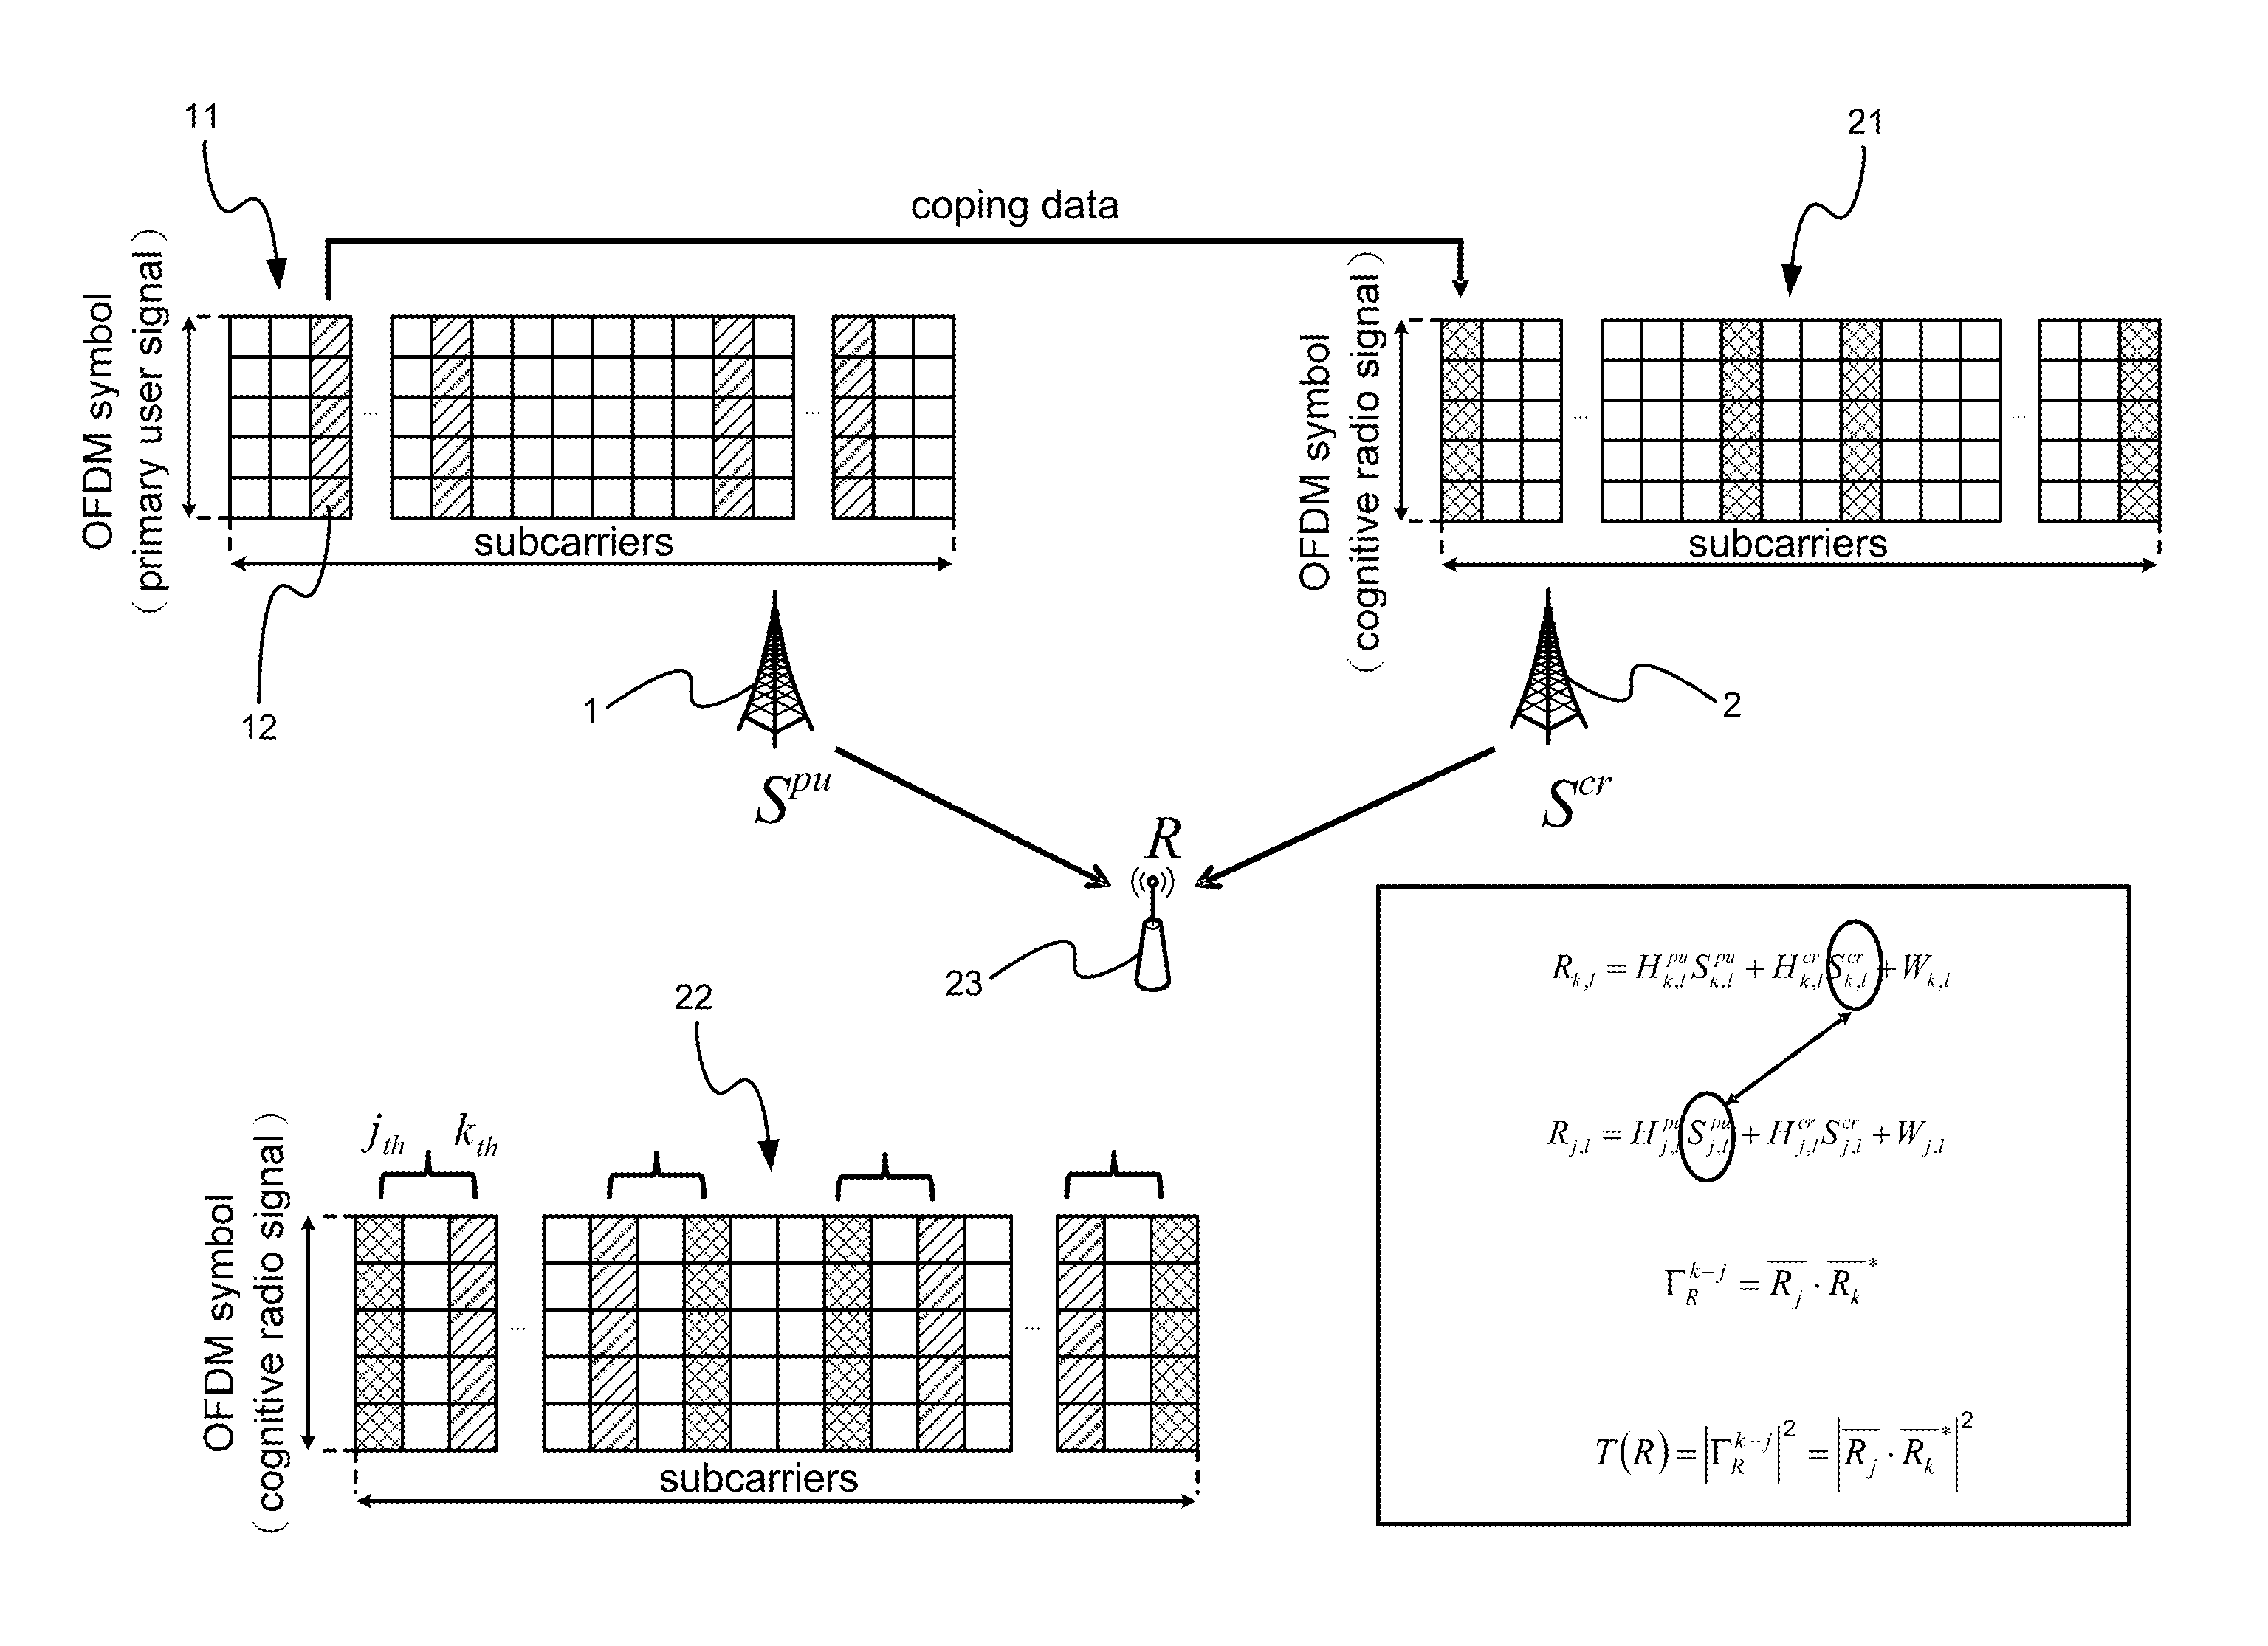 Active sensing method based on spectral correlation for cognitive radio systems